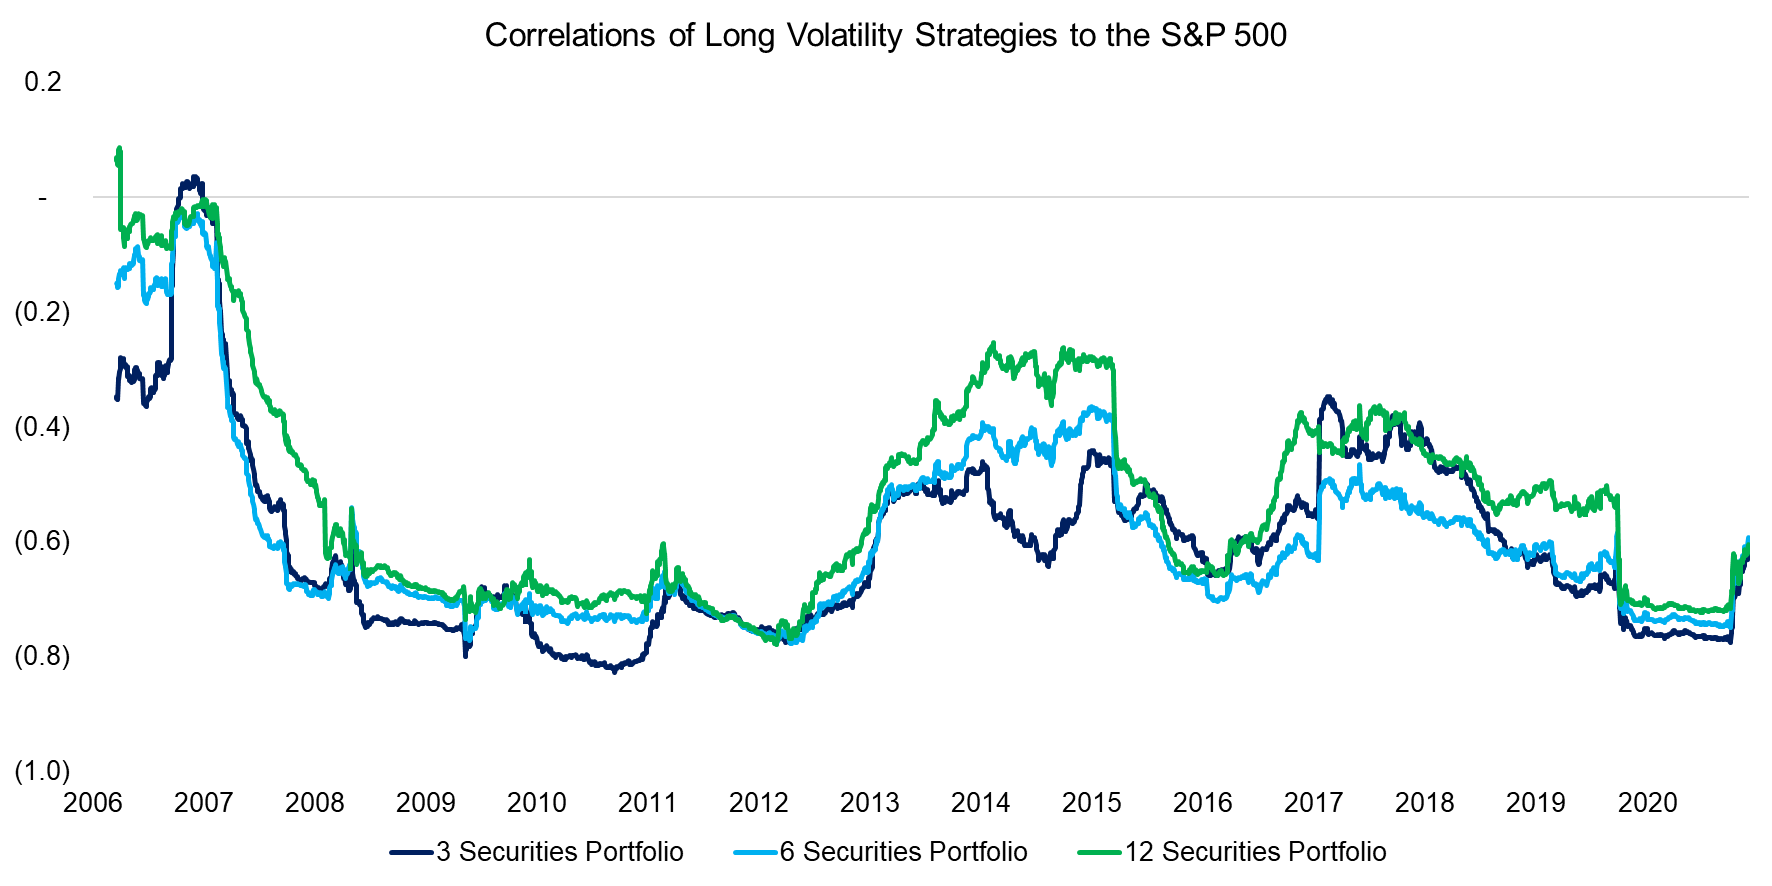 Correlations of Long Volatility Strategies to the S&P 500